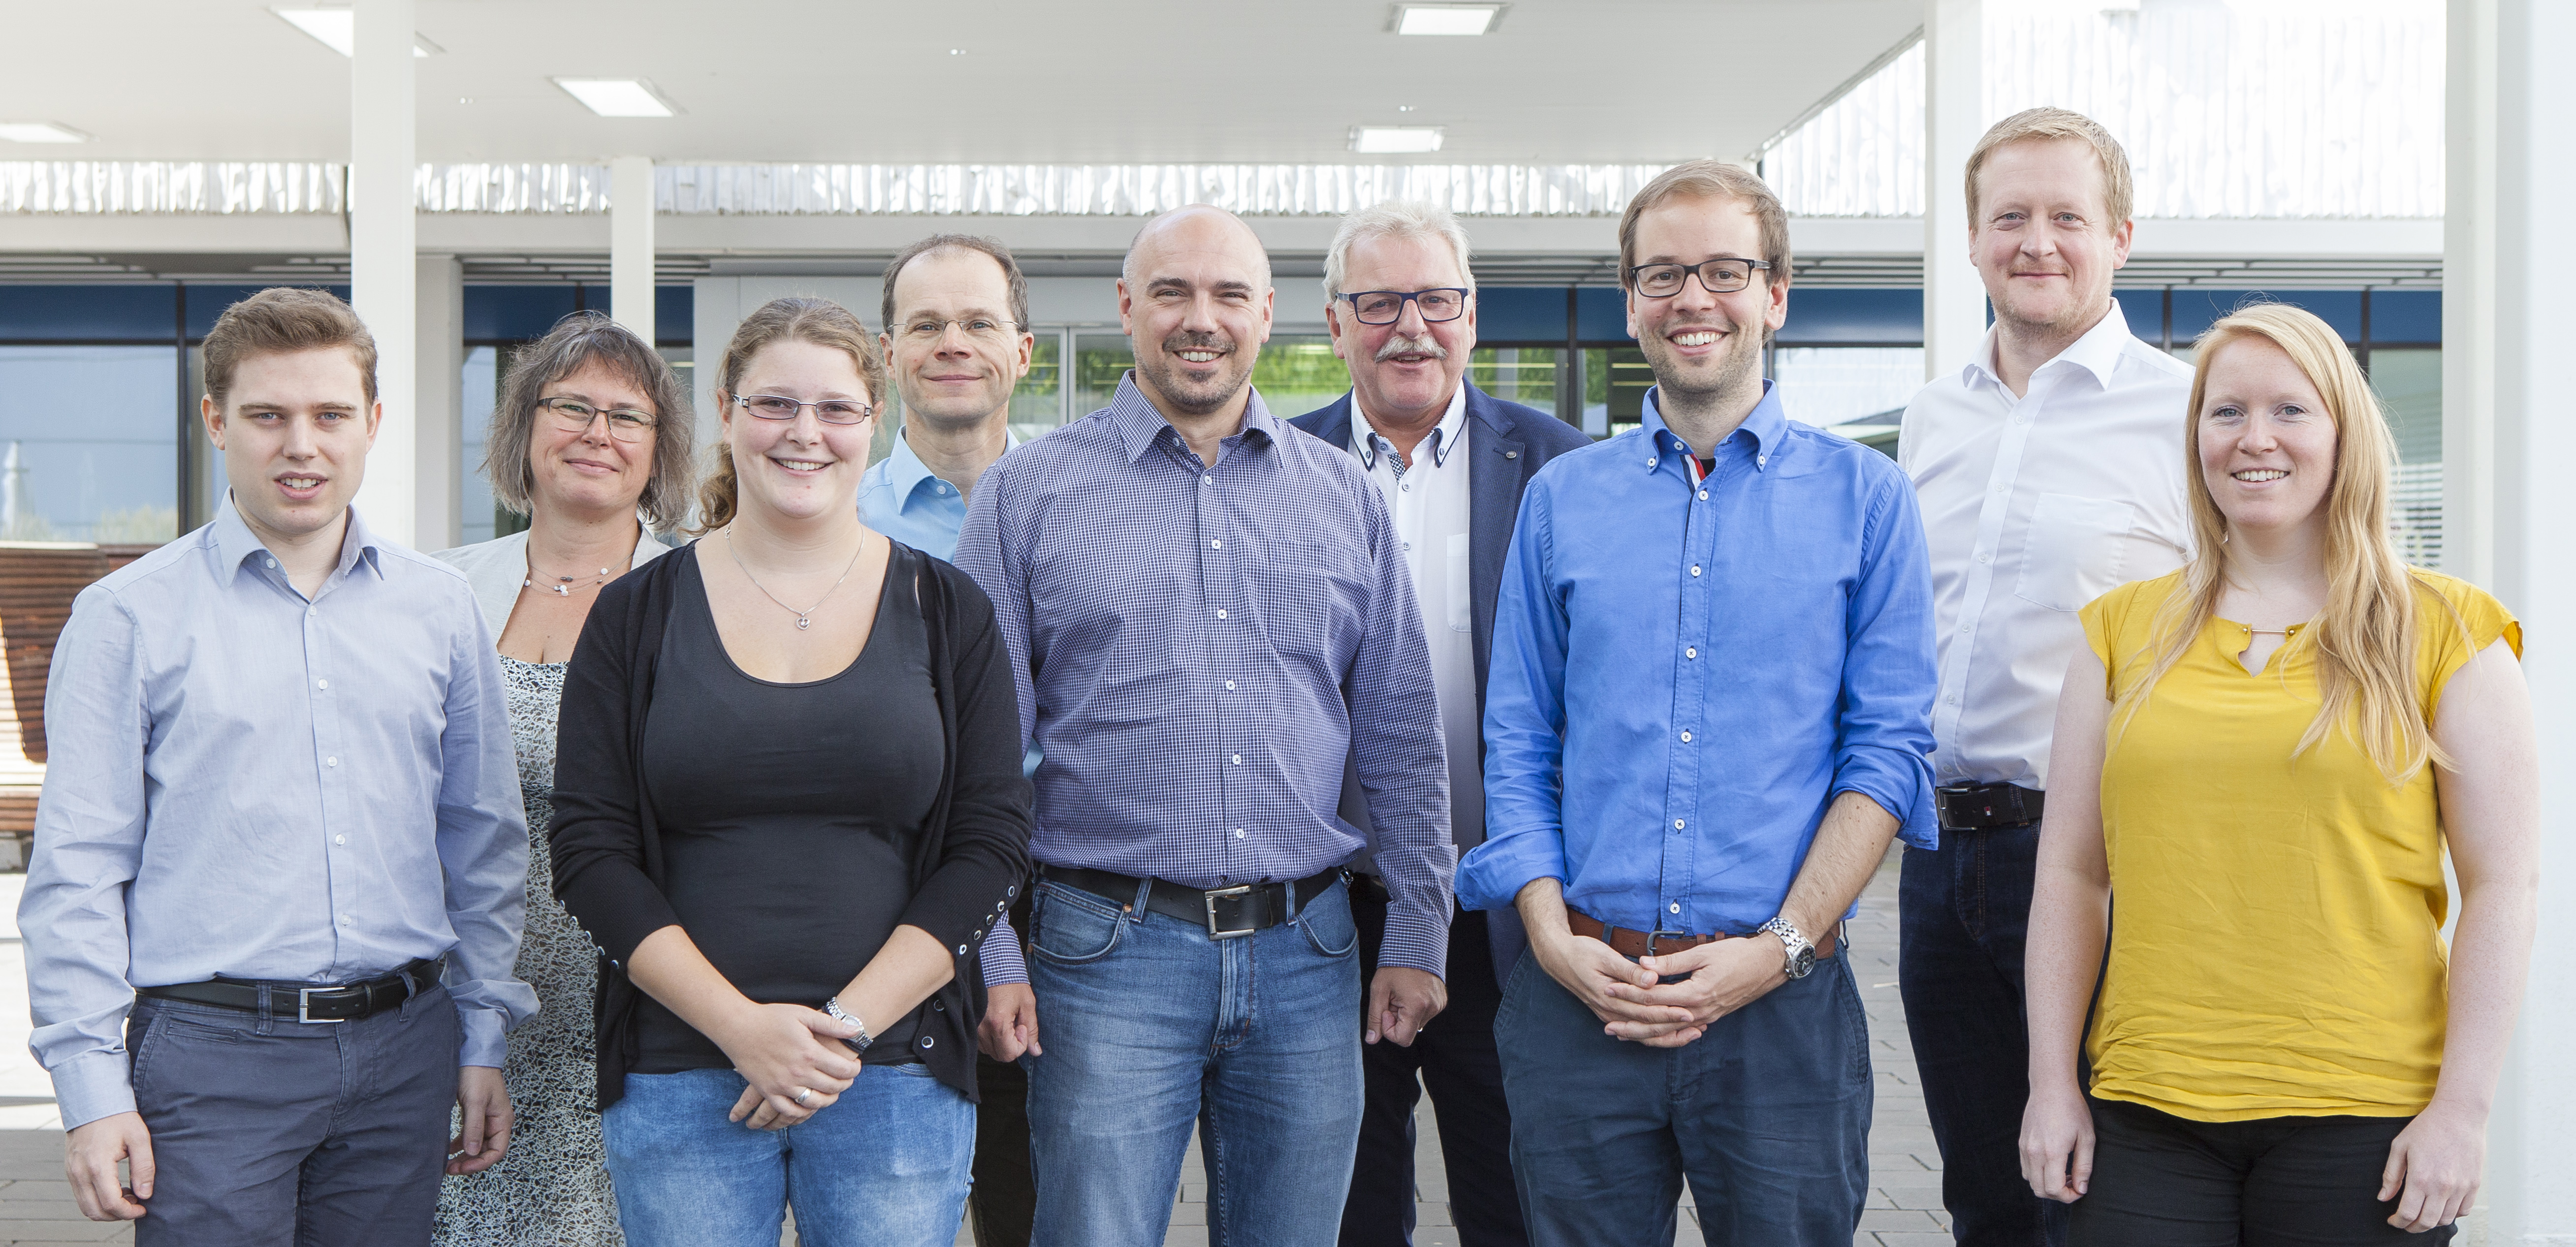 The kick-off for the »DiLaMag« project took place on August 29, 2018, at Fraunhofer IAF statt. 